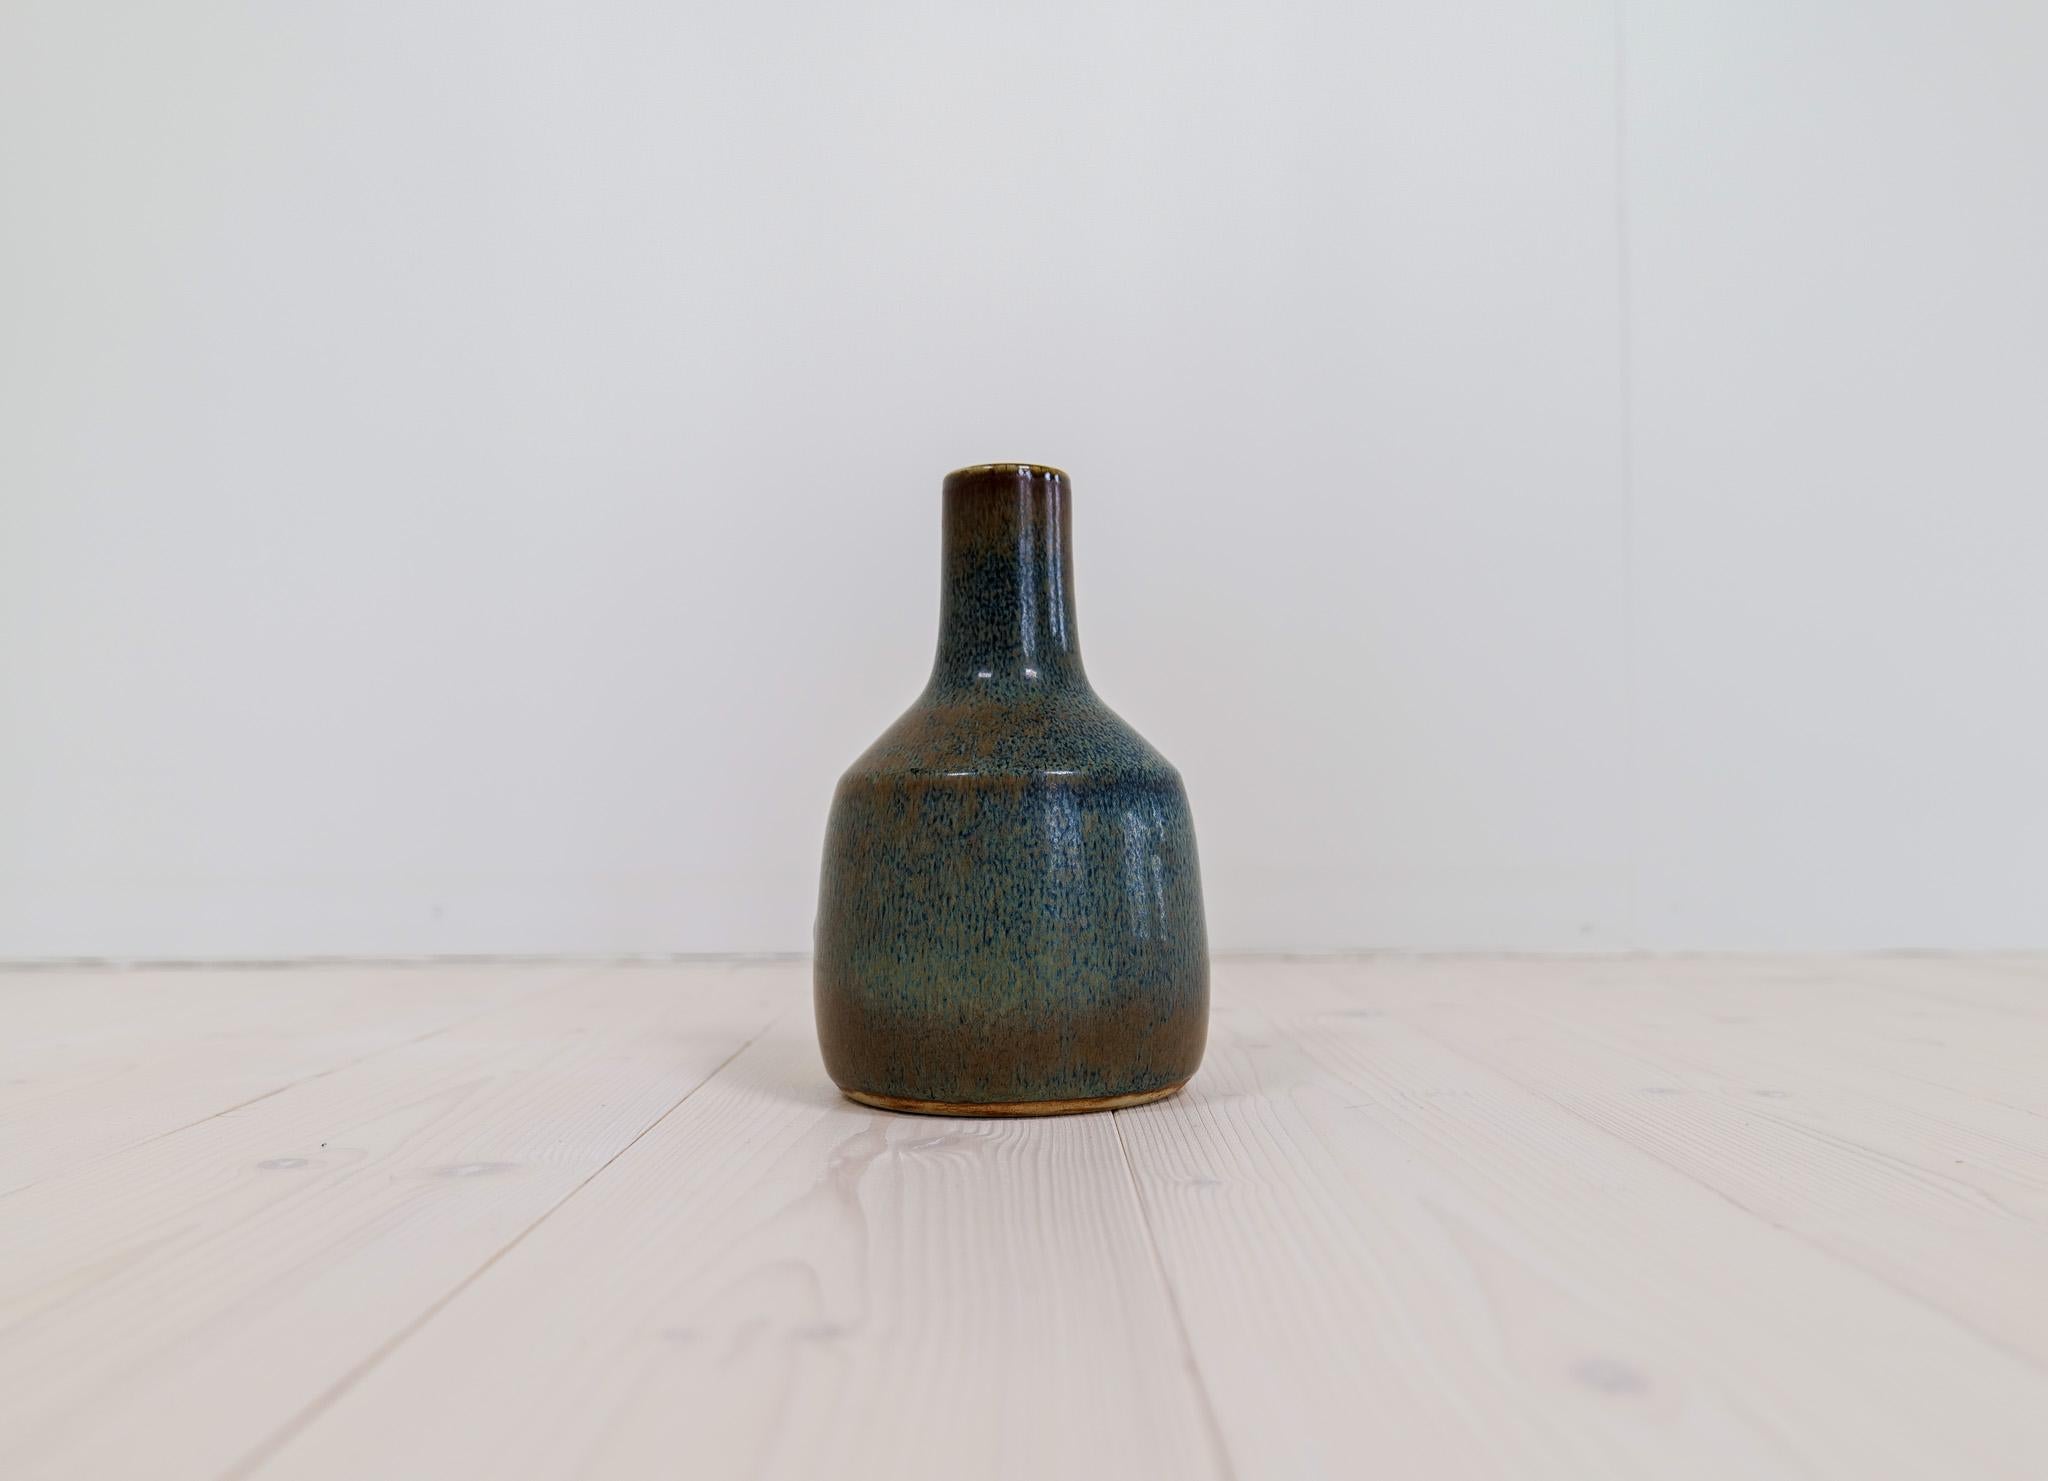 A good-looking large studio vase from Rörstrand and maker/designer Carl Harry Stålhane. Made in Sweden in the midcentury. Beautiful, glazed vases in good condition. Sculptured in true Scandinavian design with that stunning glaze. 

Good vintage